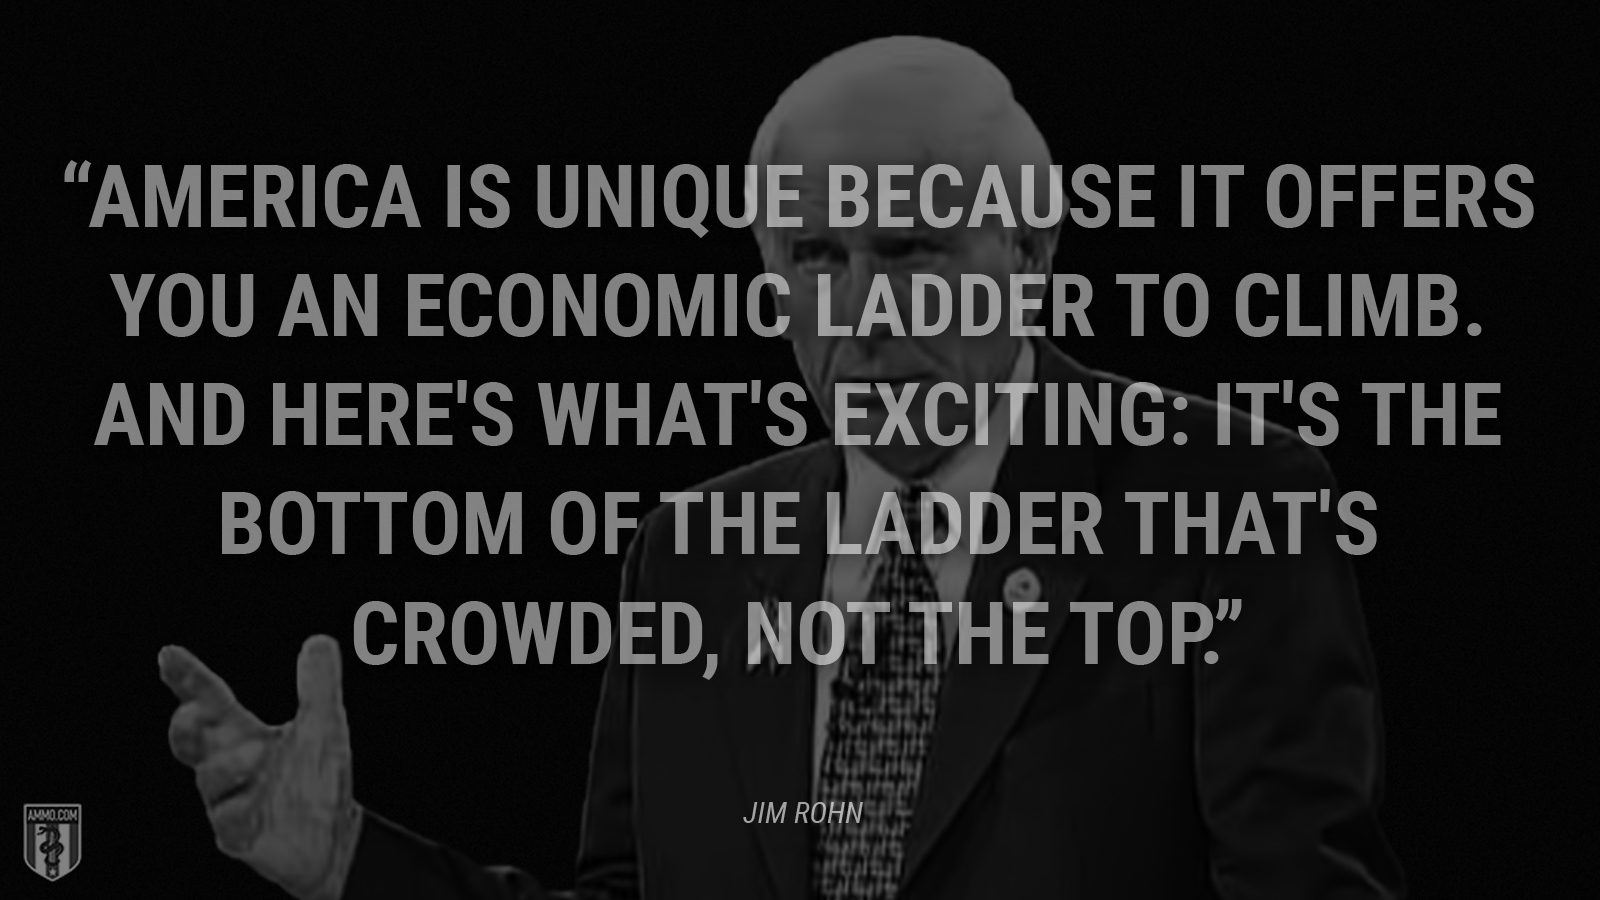 “America is unique because it offers you an economic ladder to climb. And here's what's exciting: It's the bottom of the ladder that's crowded, not the top.” - Jim Rohn